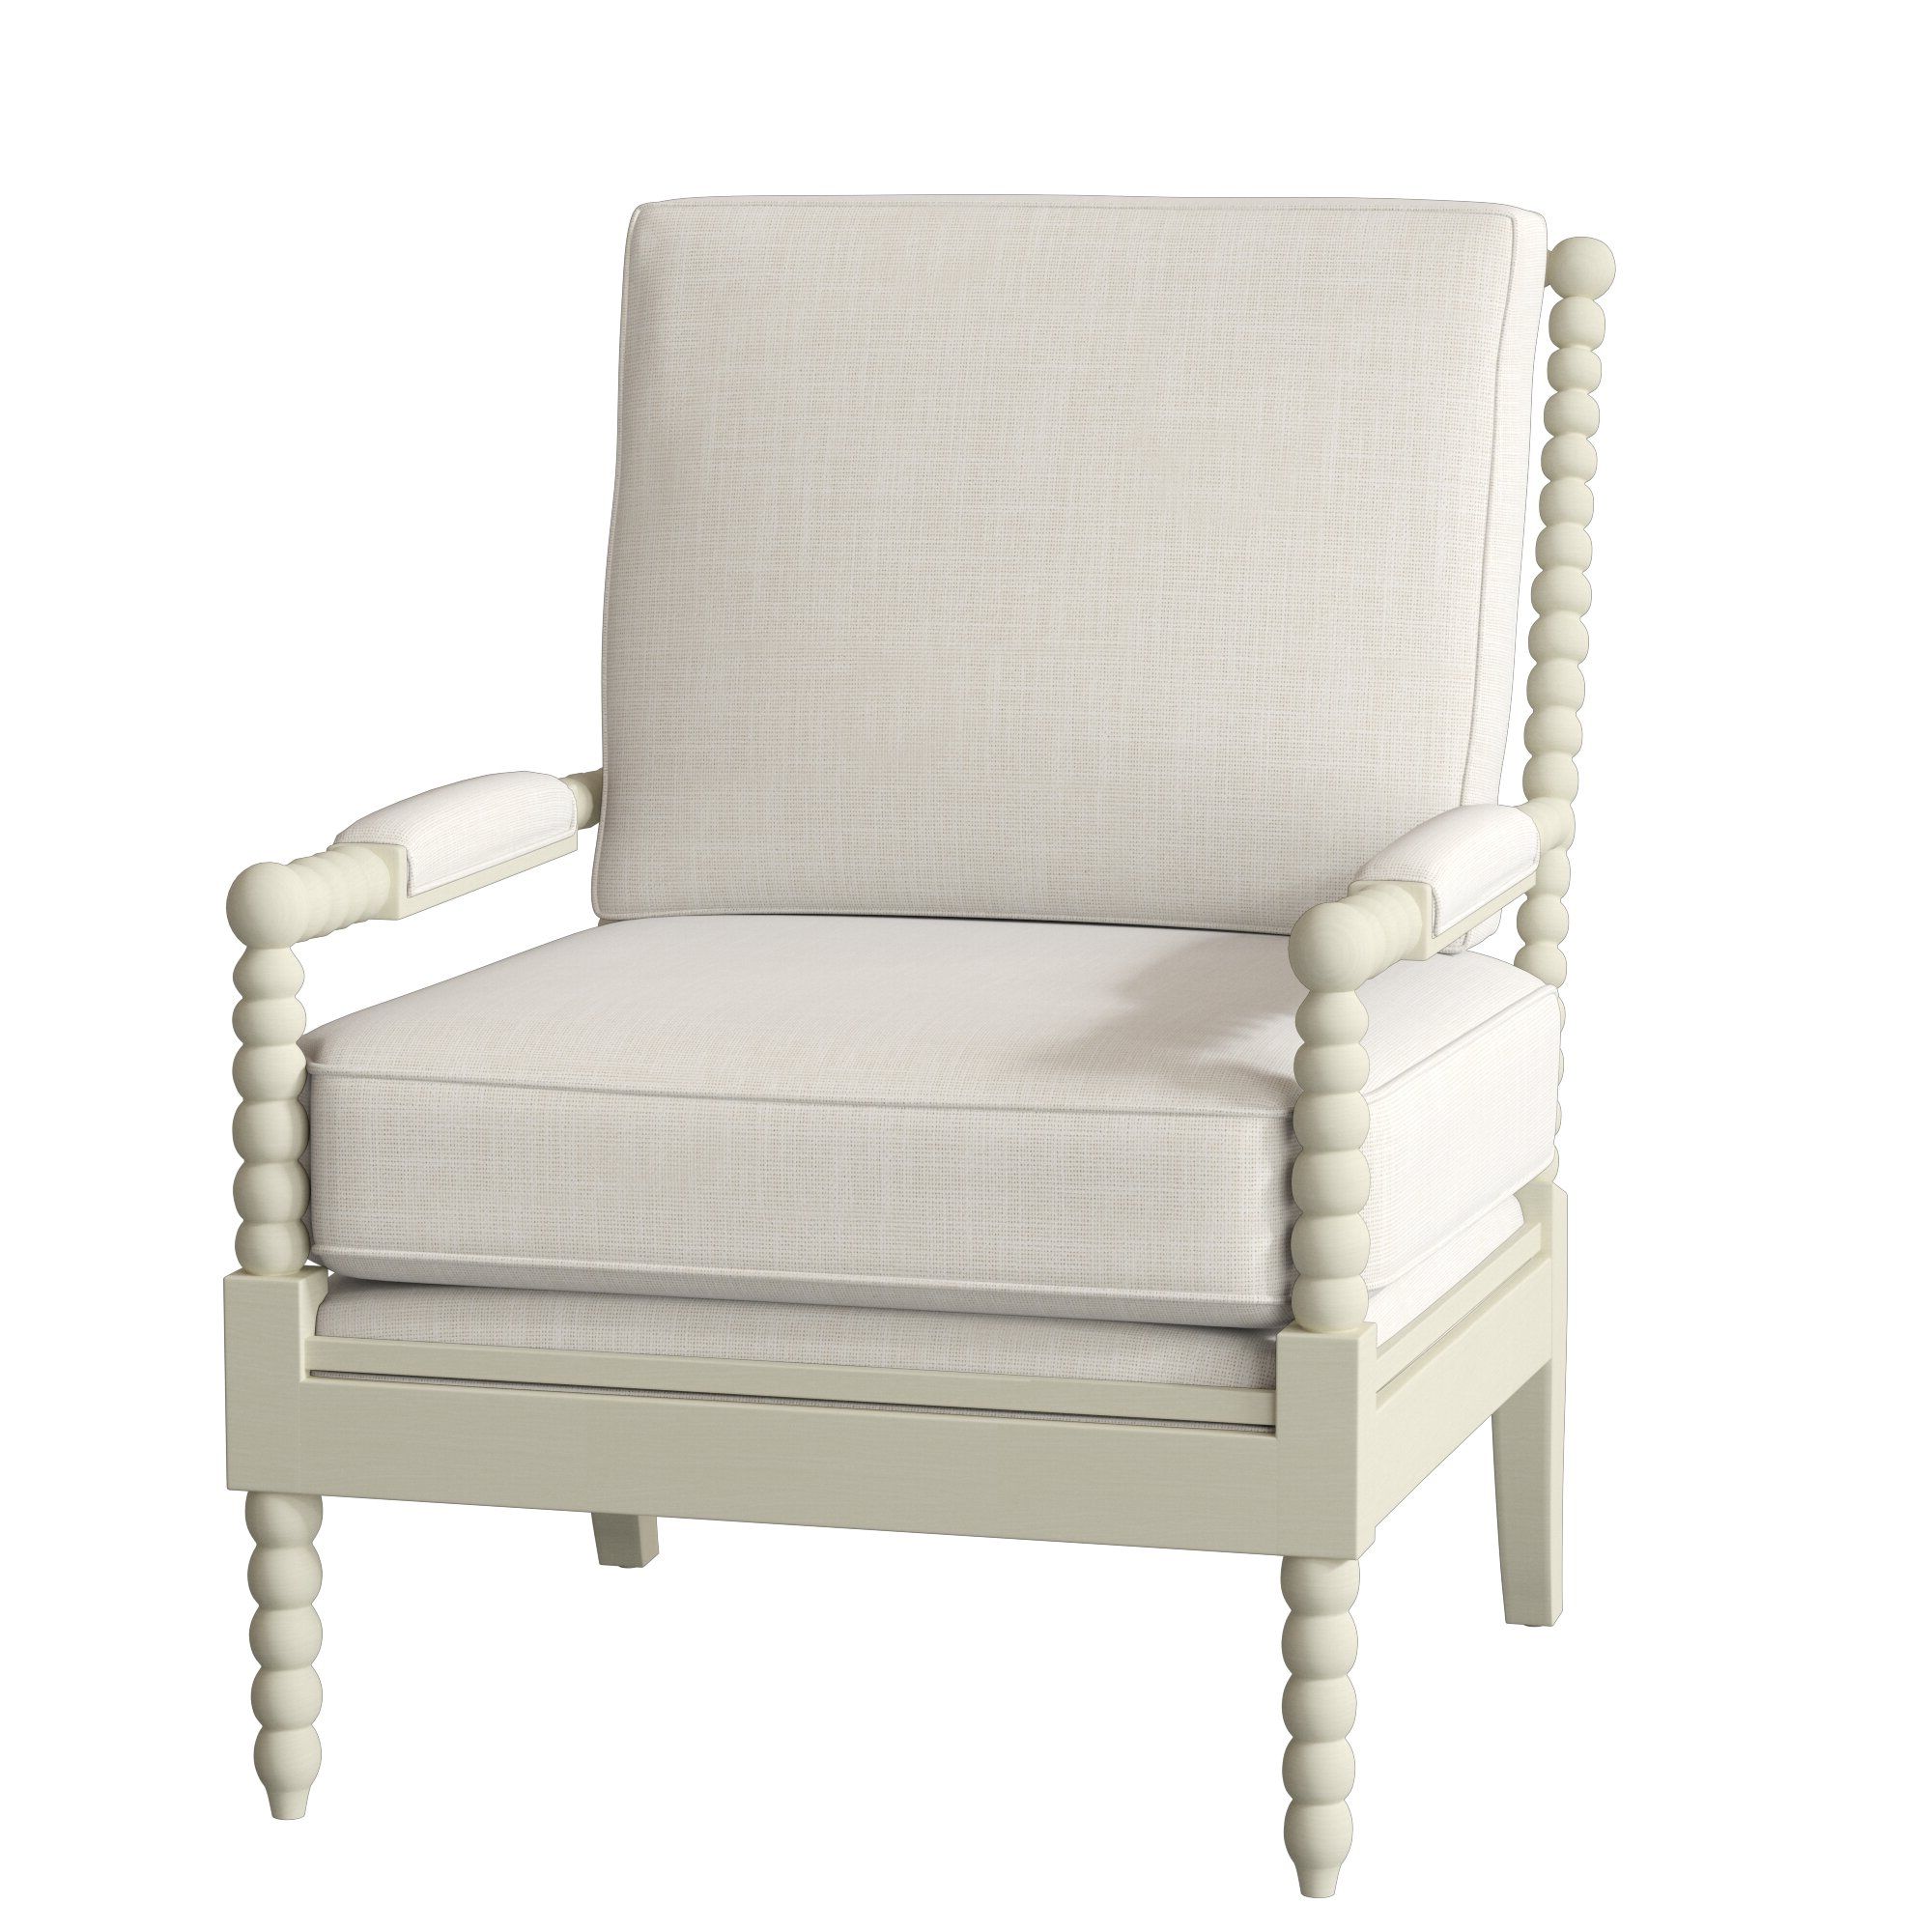 Polyester & Polyester Blend Birch Lane™ Accent Chairs You'll Pertaining To Well Known Young Armchairs By Birch Lane (View 6 of 20)